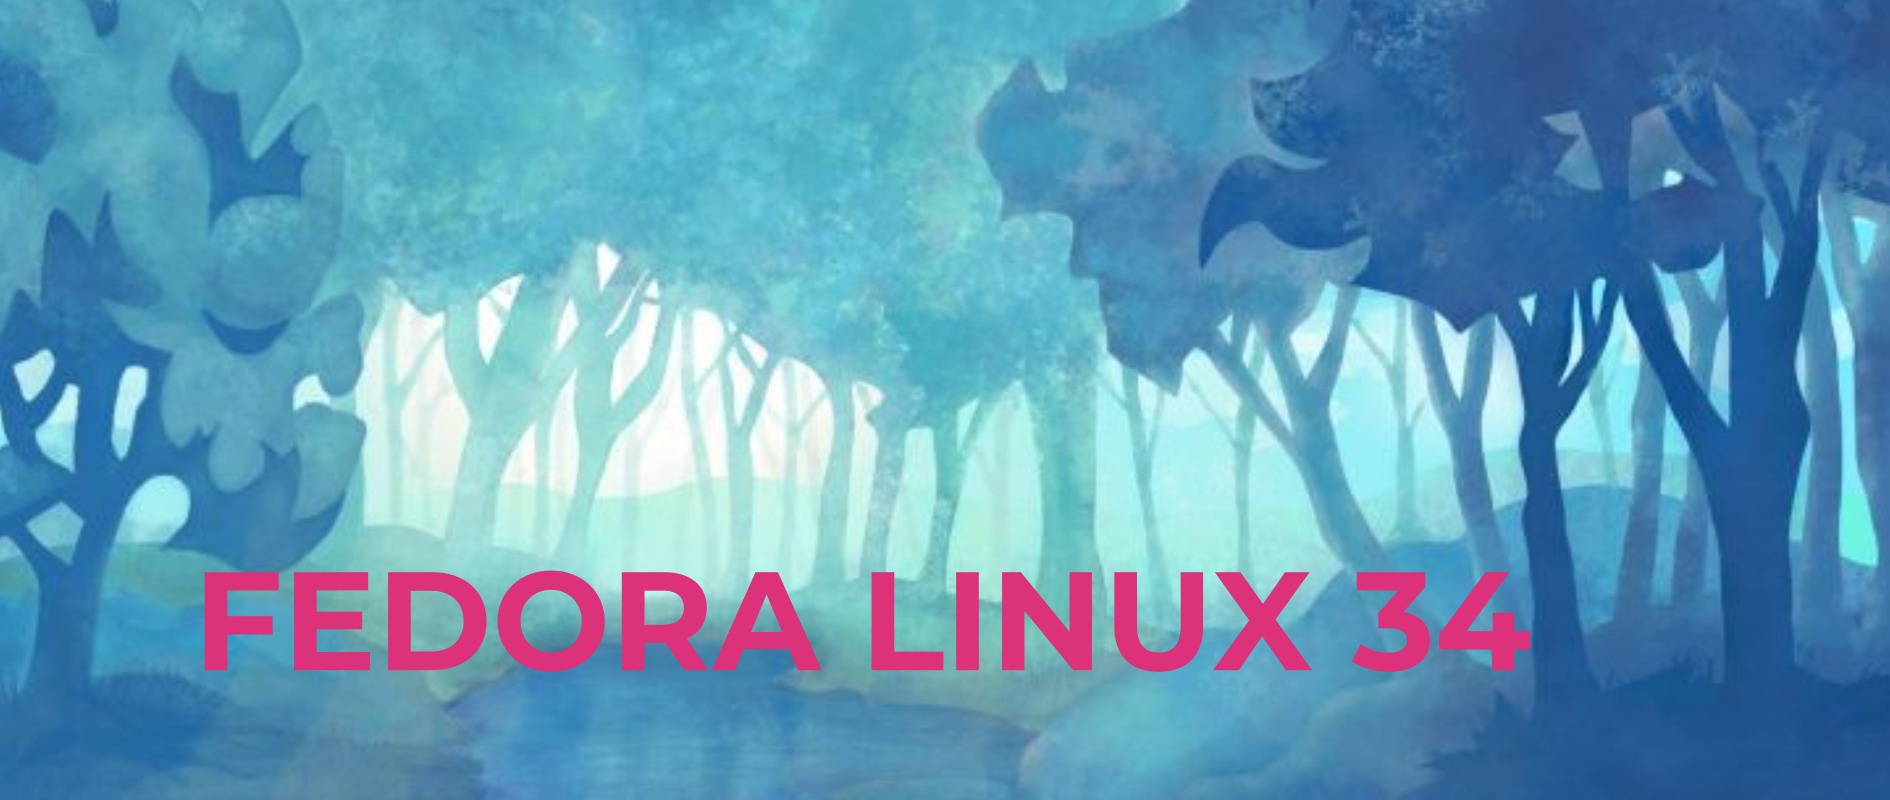 Fedora Linux 34 is officially here! - Fedora Magazine